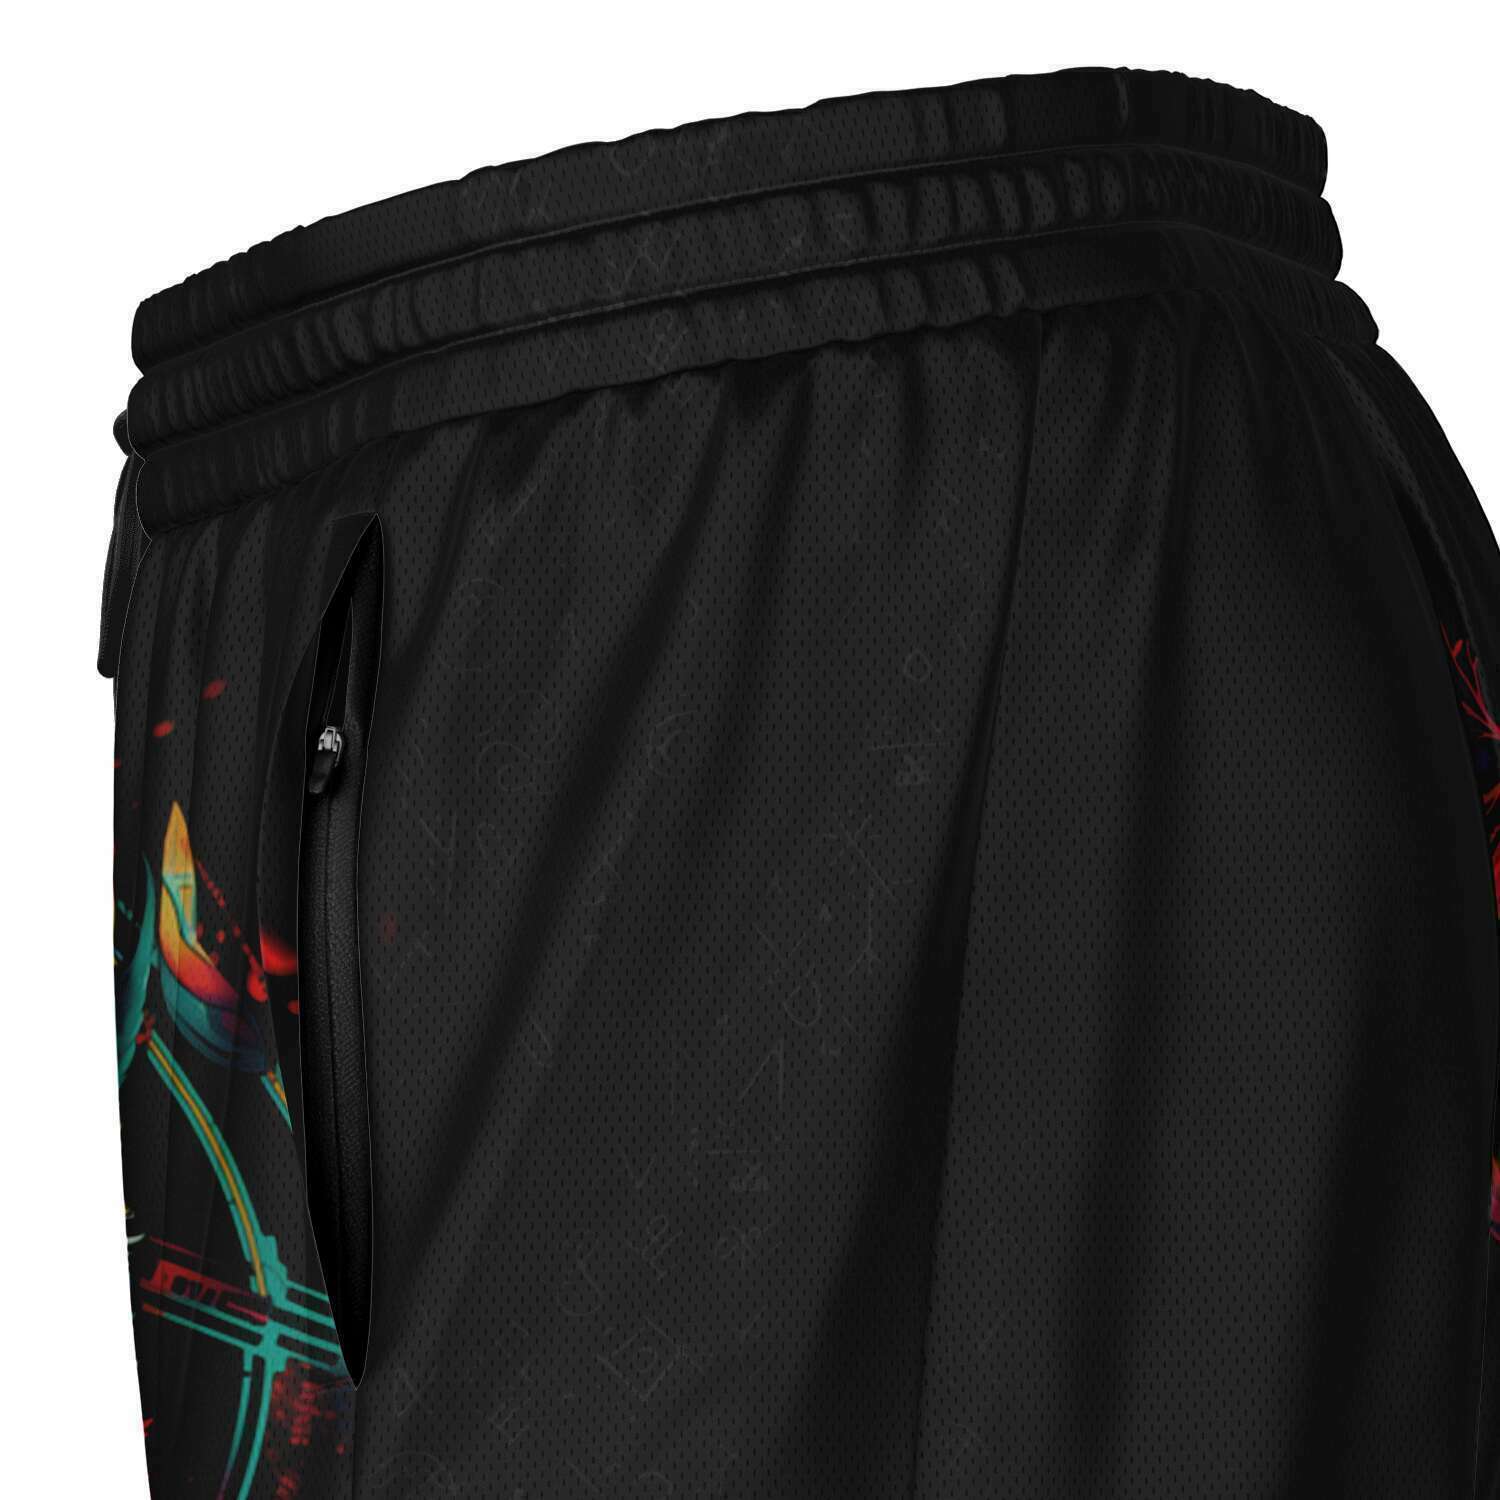 Lupine Dreams 2 in 1 shorts - Redwolf Jersey Works